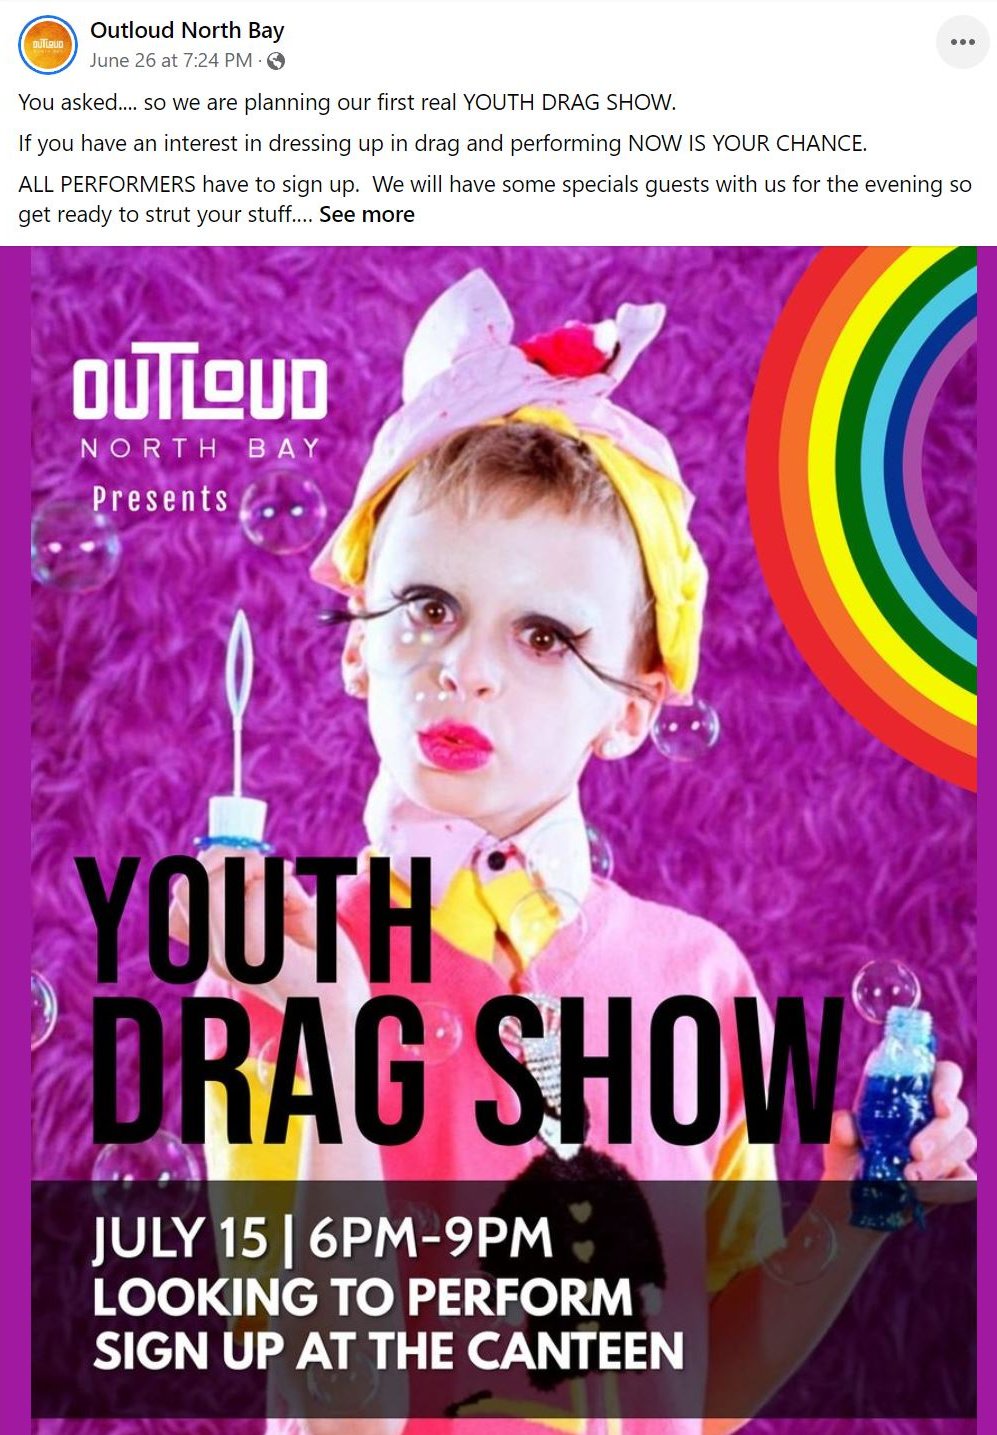 youthdragshow.jpg